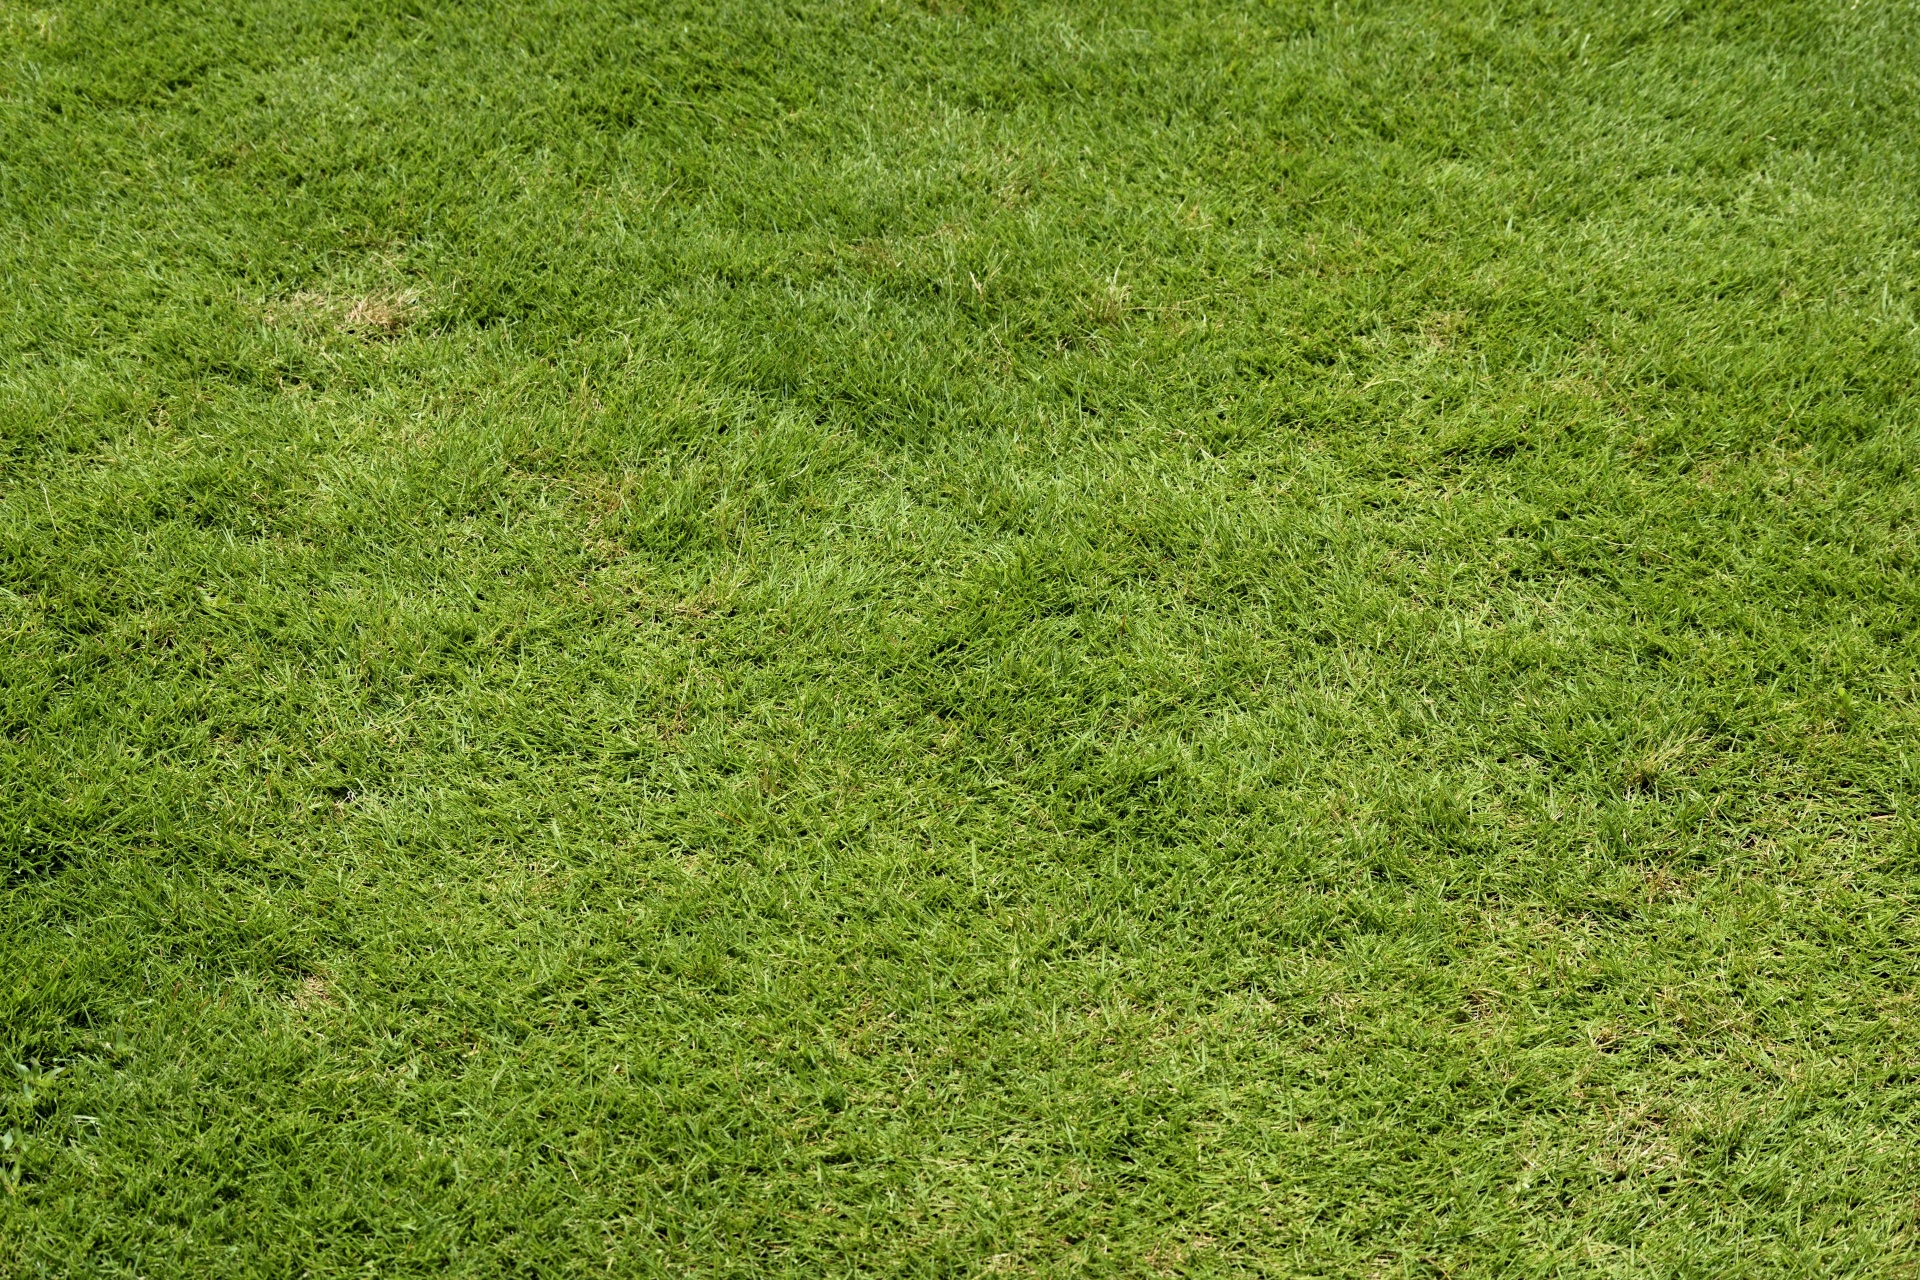 Green Lawn Grass Background Free Stock Photo - Public Domain Pictures